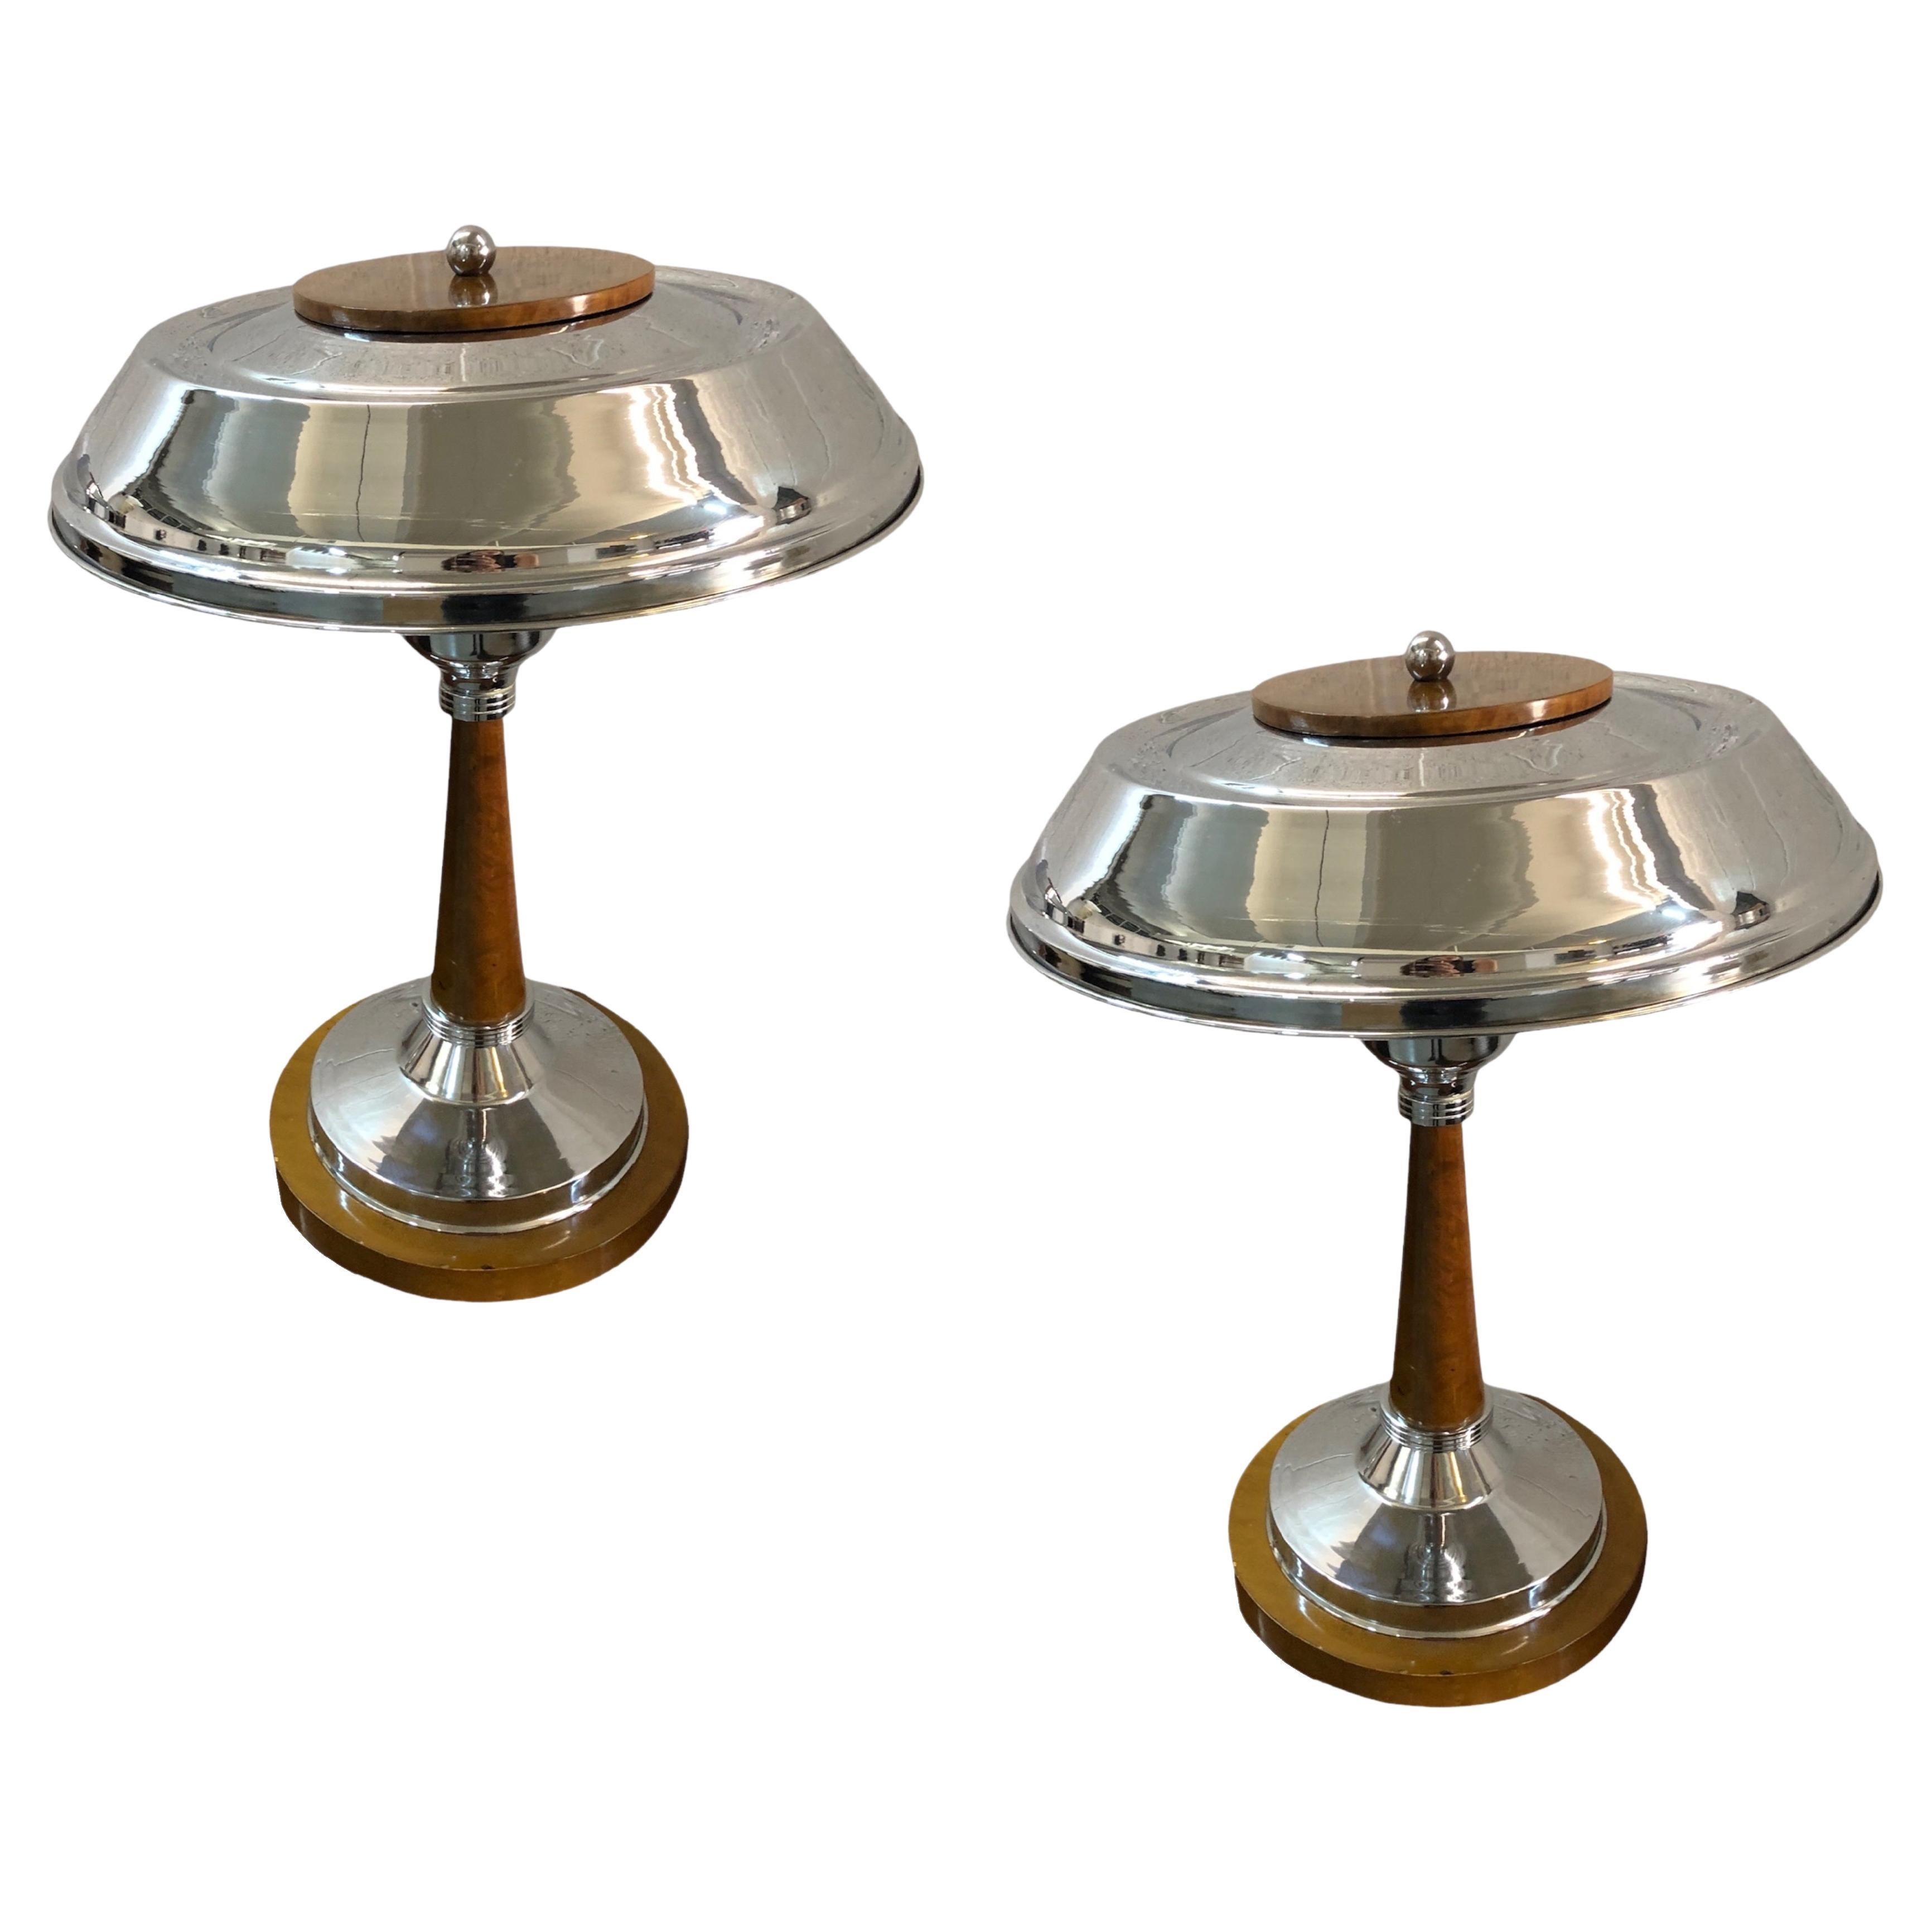 Pair of Art Deco Table Lamps in wood and chrome, 1920, France For Sale